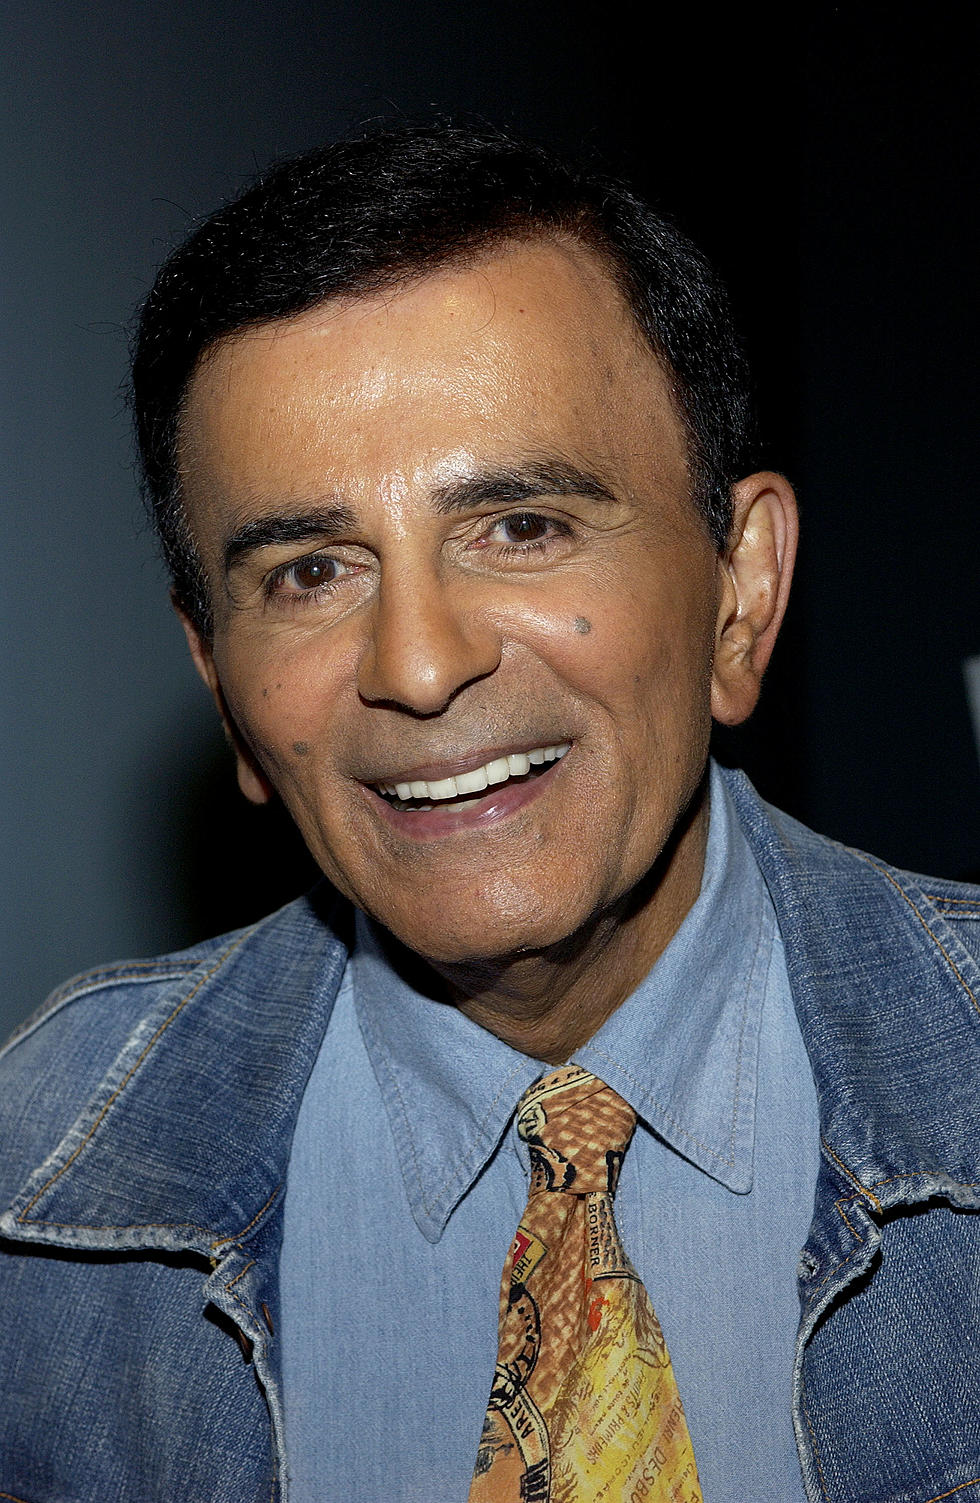 Casey Kasem – My Thoughts On A Radio Icon